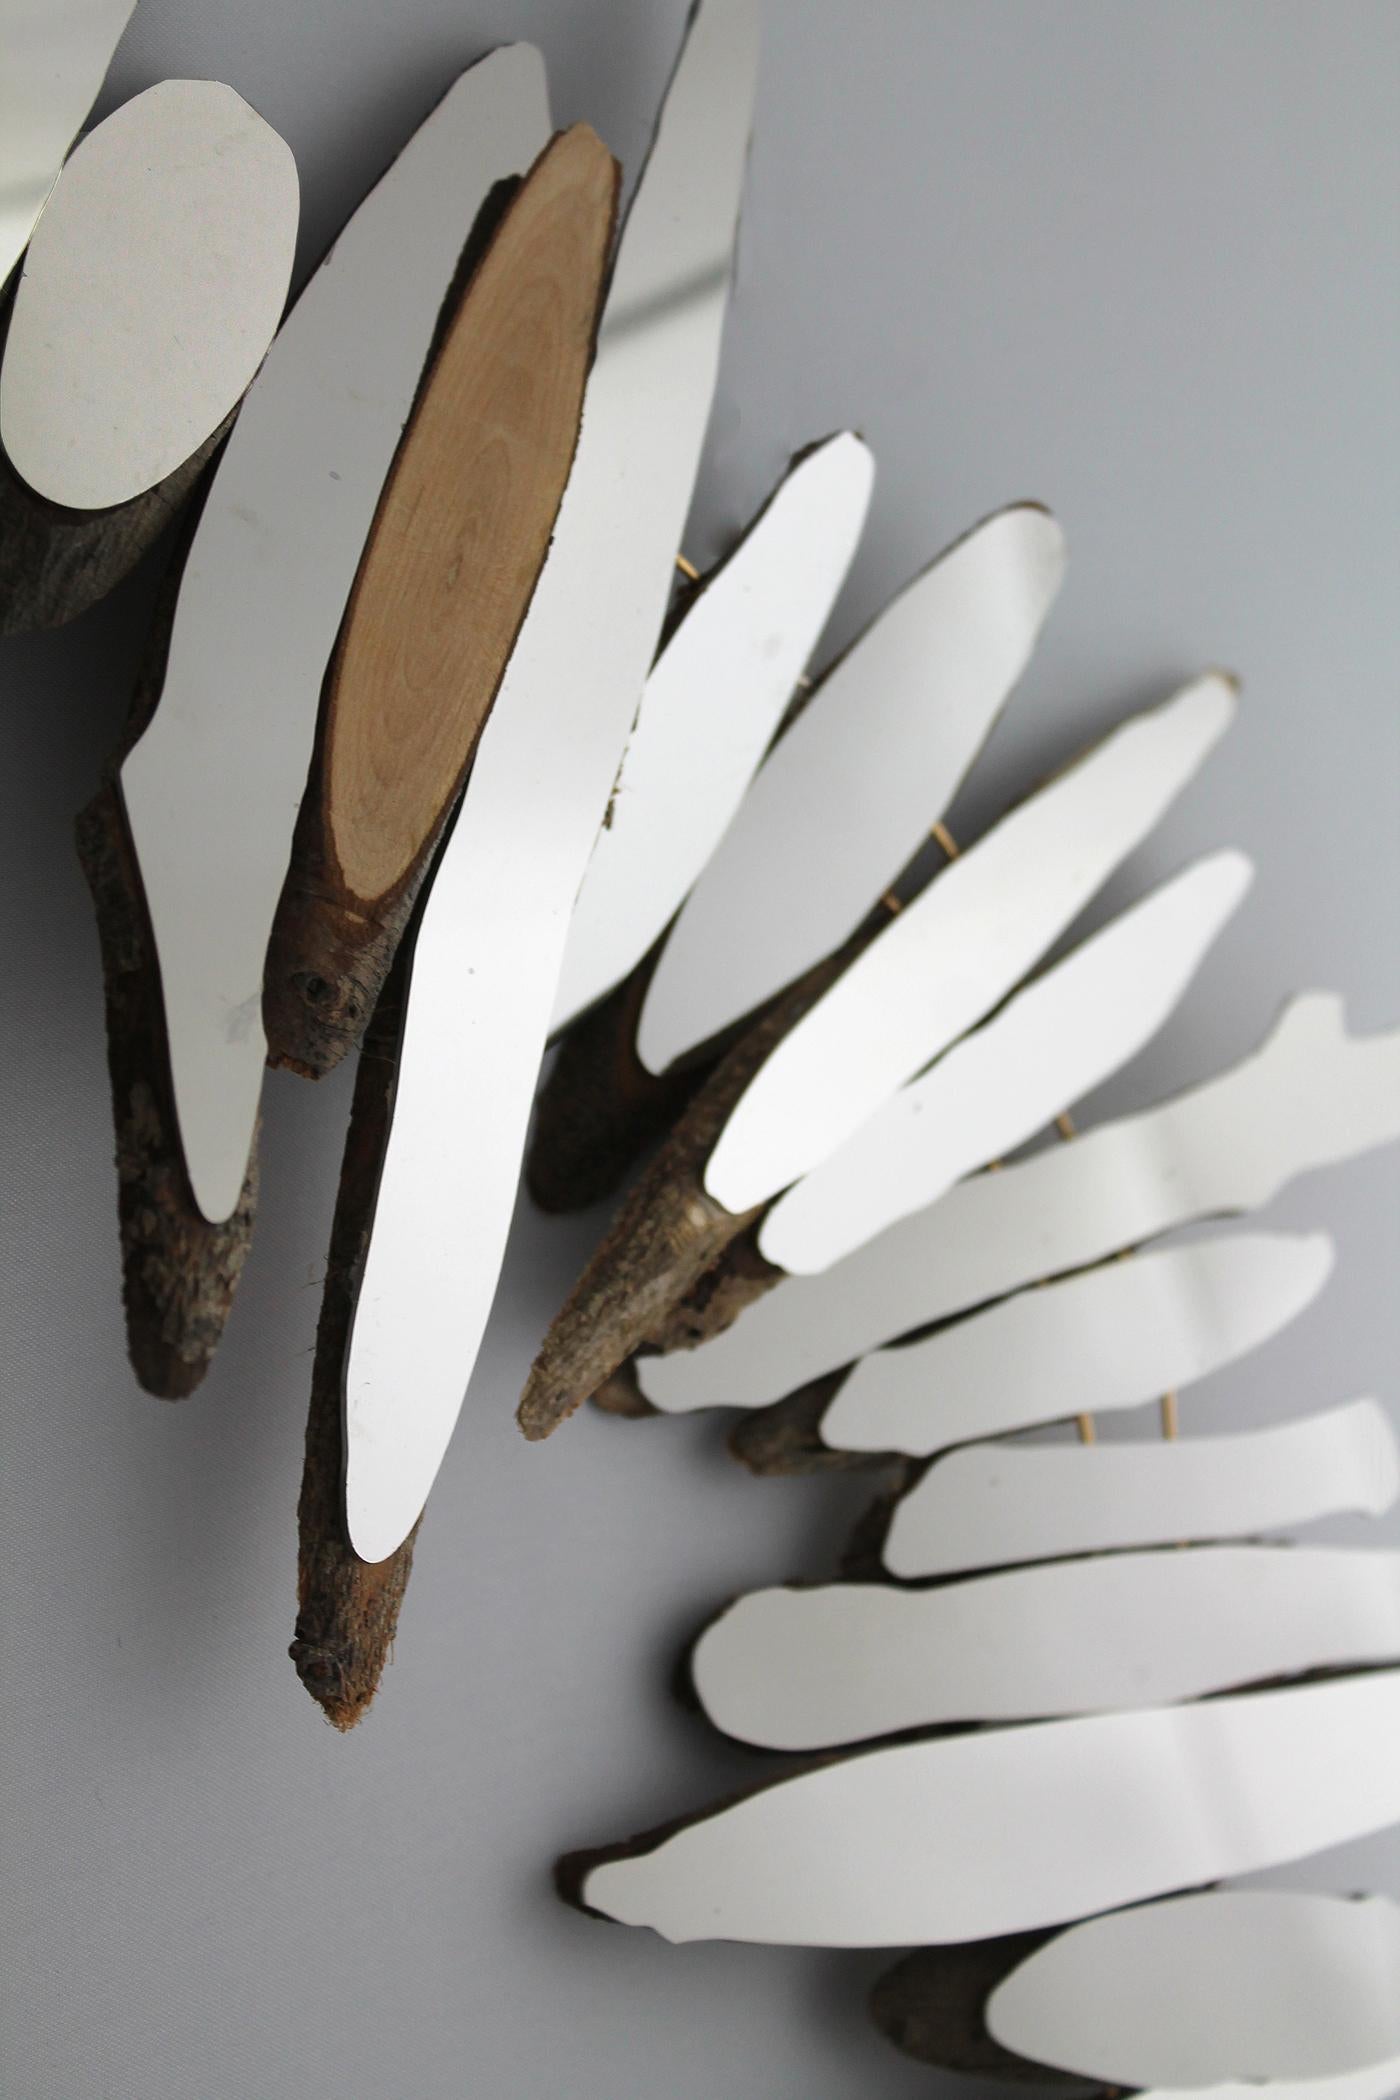 Willow Feathers: A Sculptural Wall Hanging of Mirrors and Fallen Wood - Sculpture by Lee Borthwick